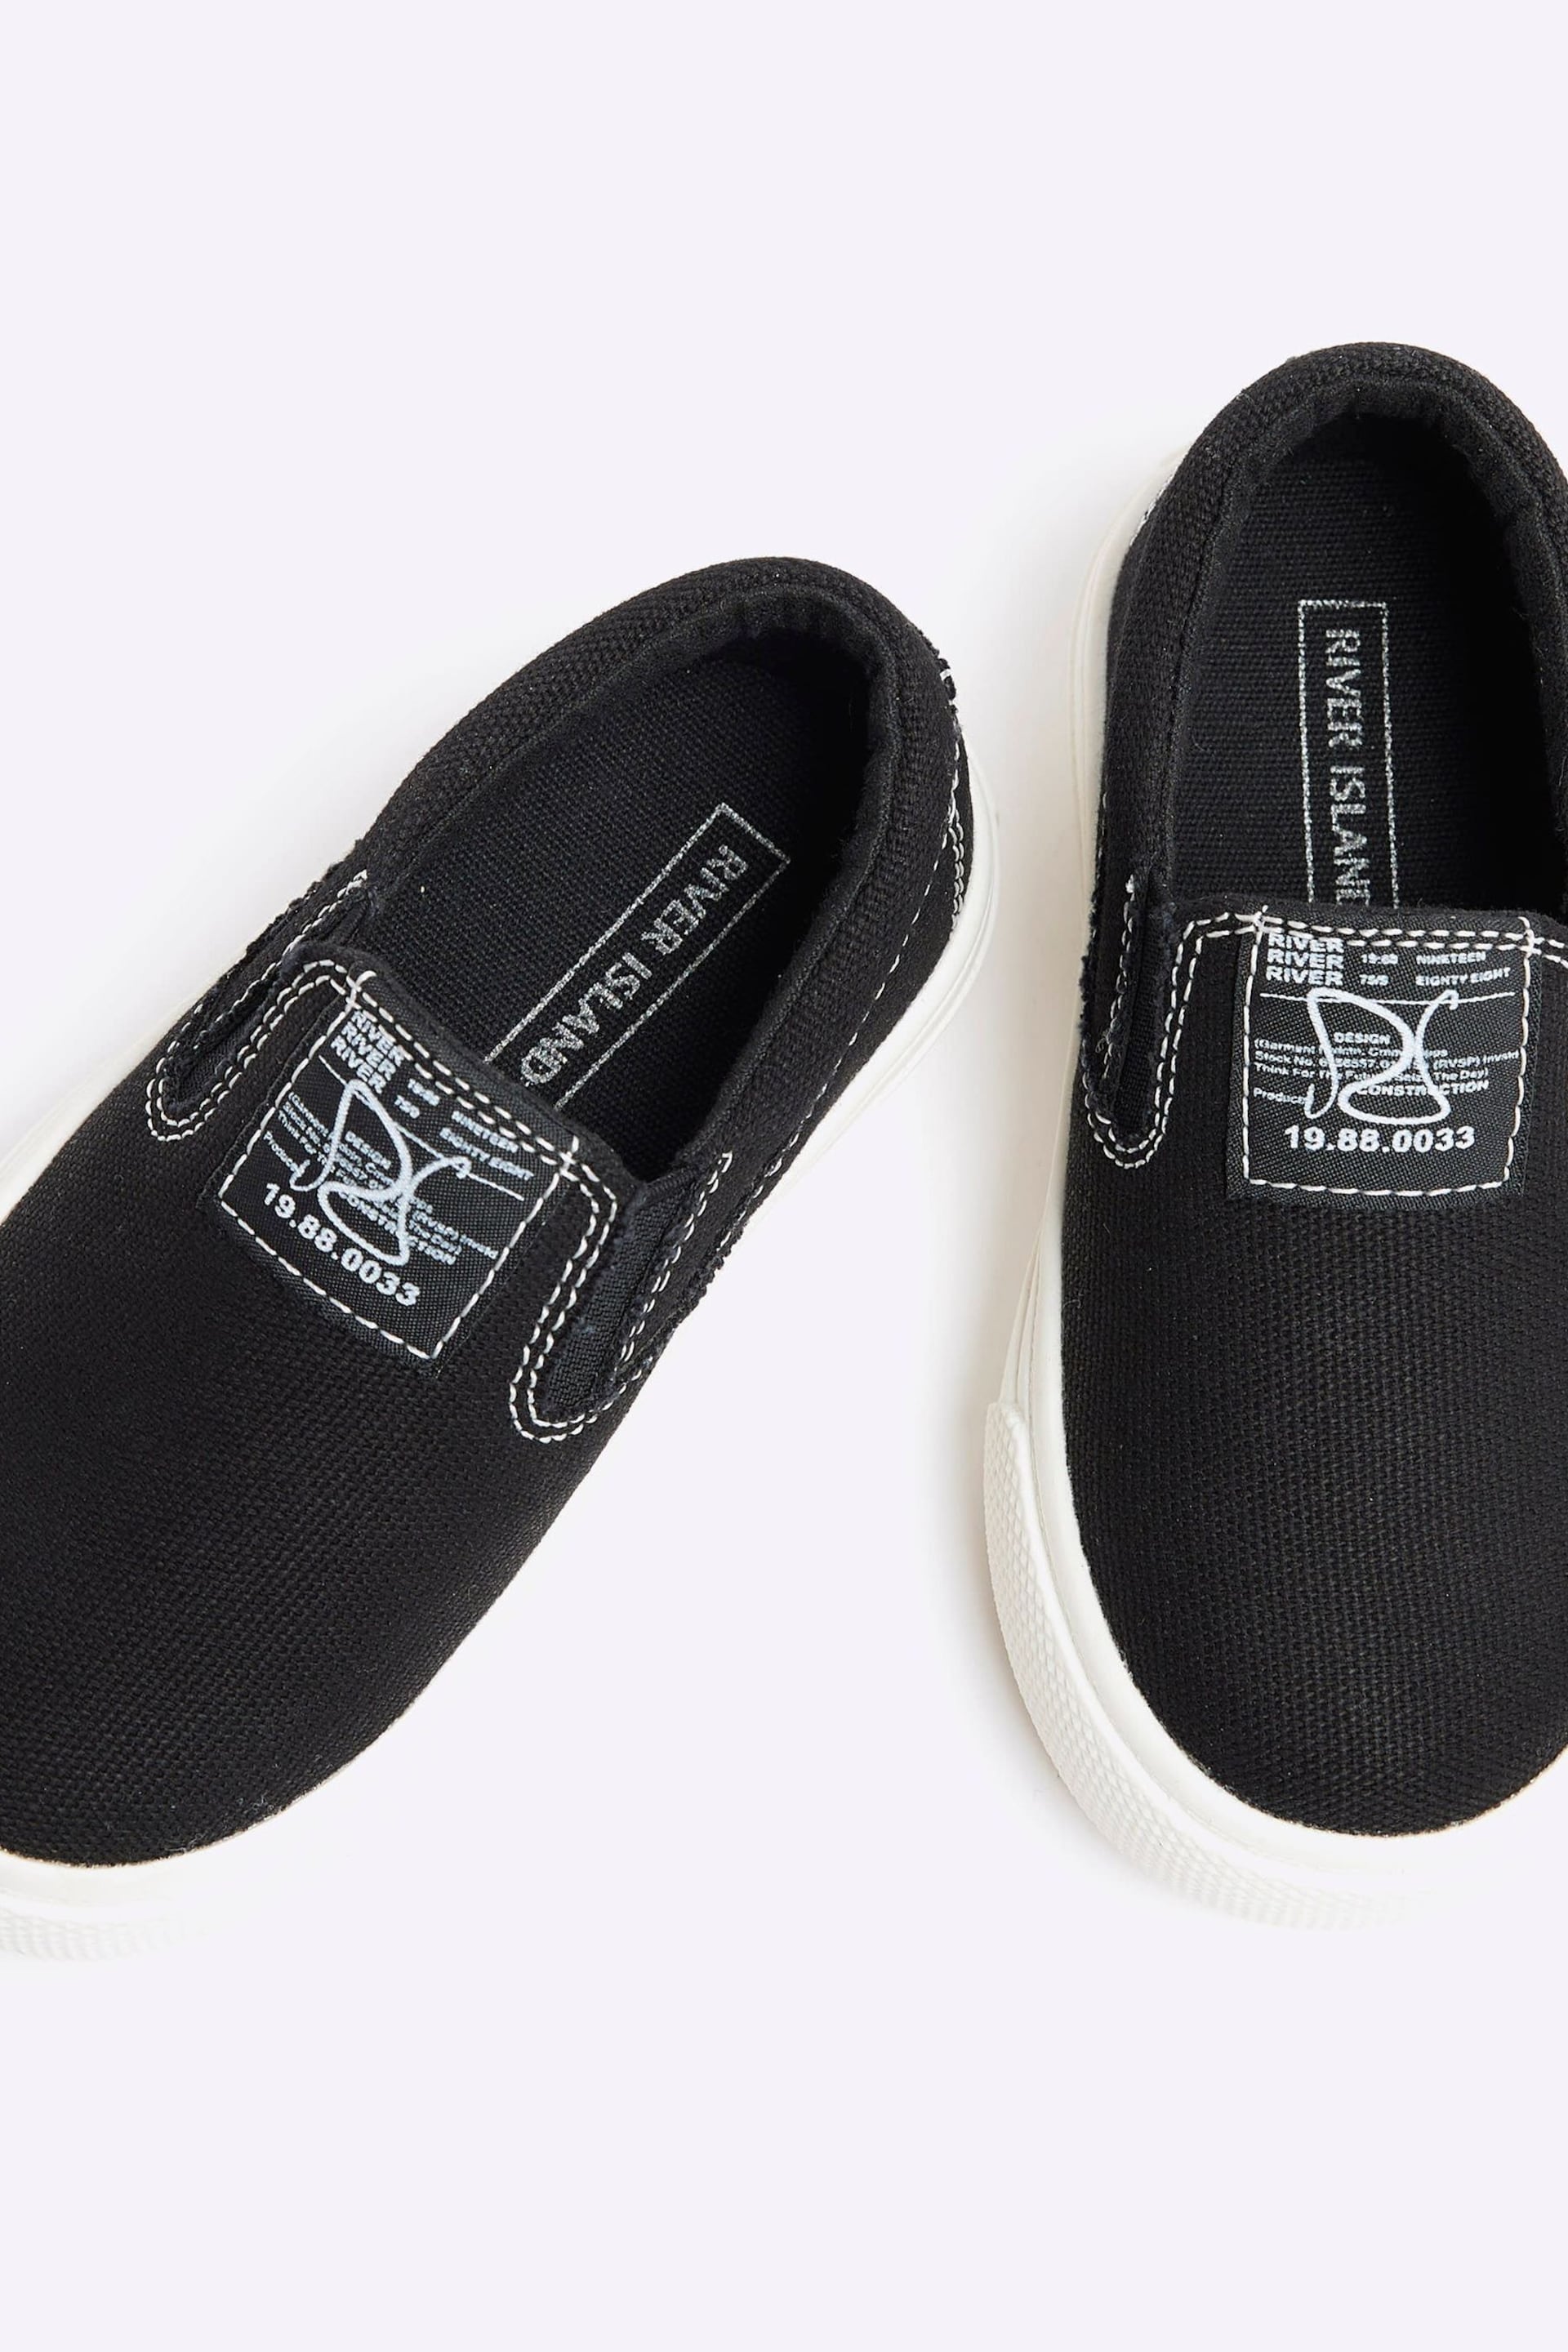 River Island Black Boys Canvas Slip-Ons Trainers - Image 3 of 4